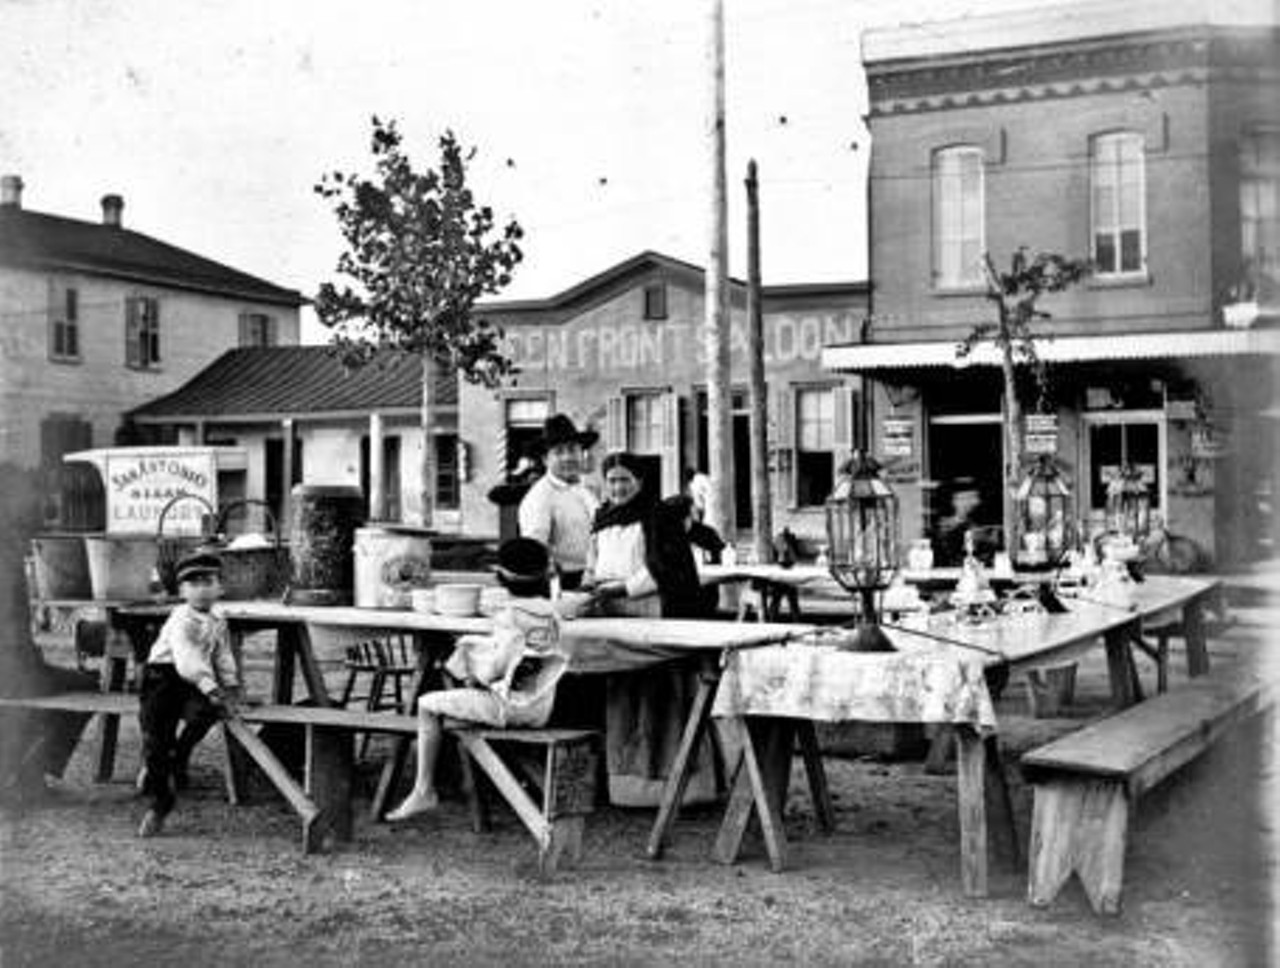 Chili stands in Haymarket Plaza, 1902. 
Photo provided by the UTSA Special Collection